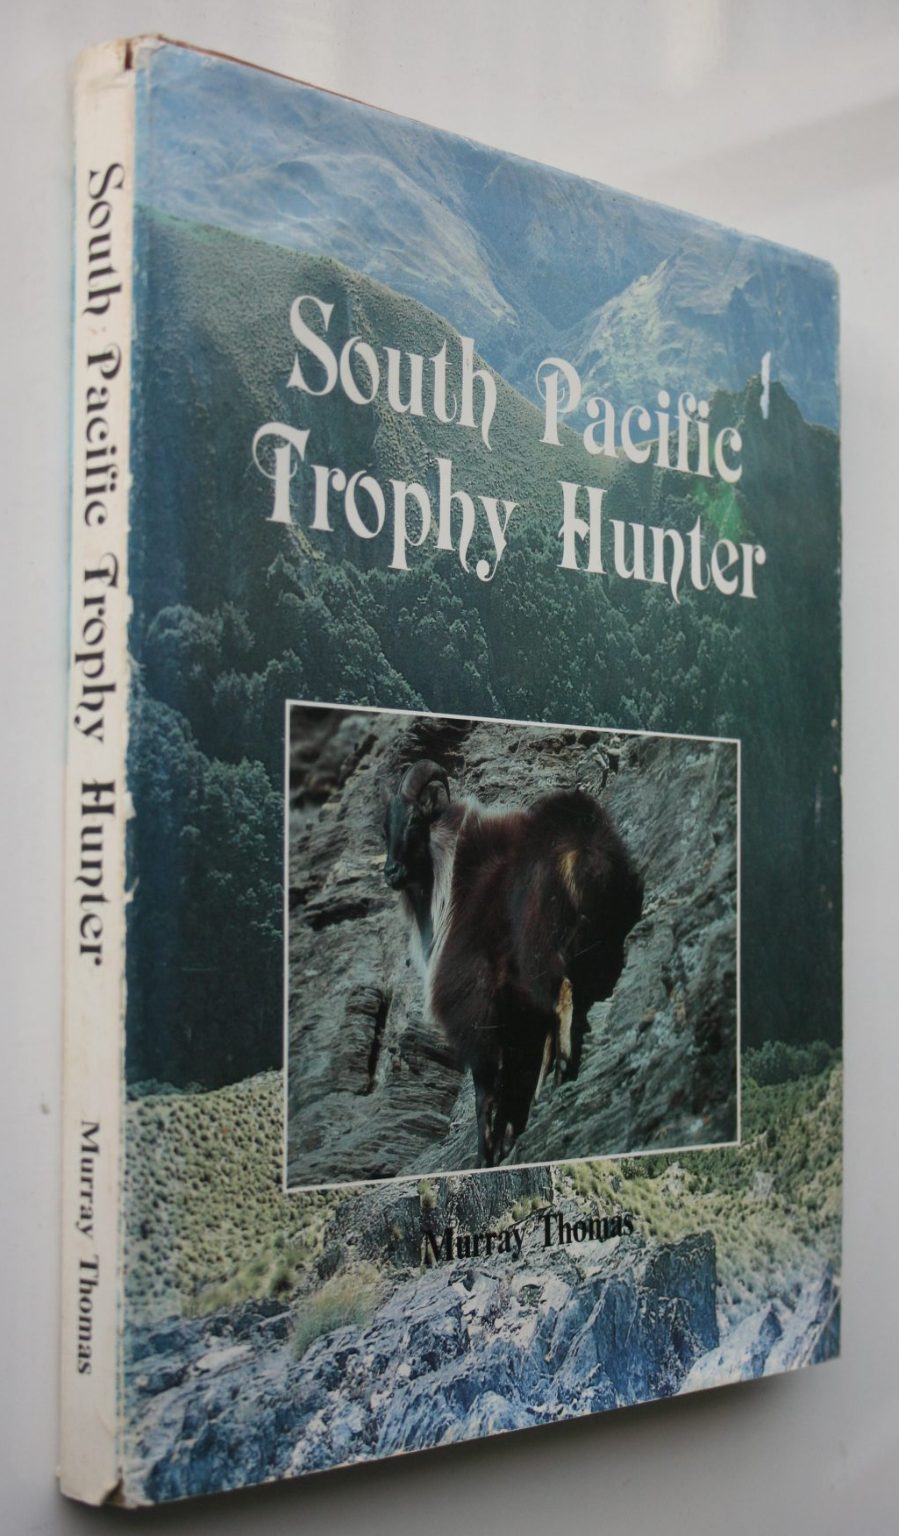 South Pacific Trophy Hunter. by Murray Thomas.